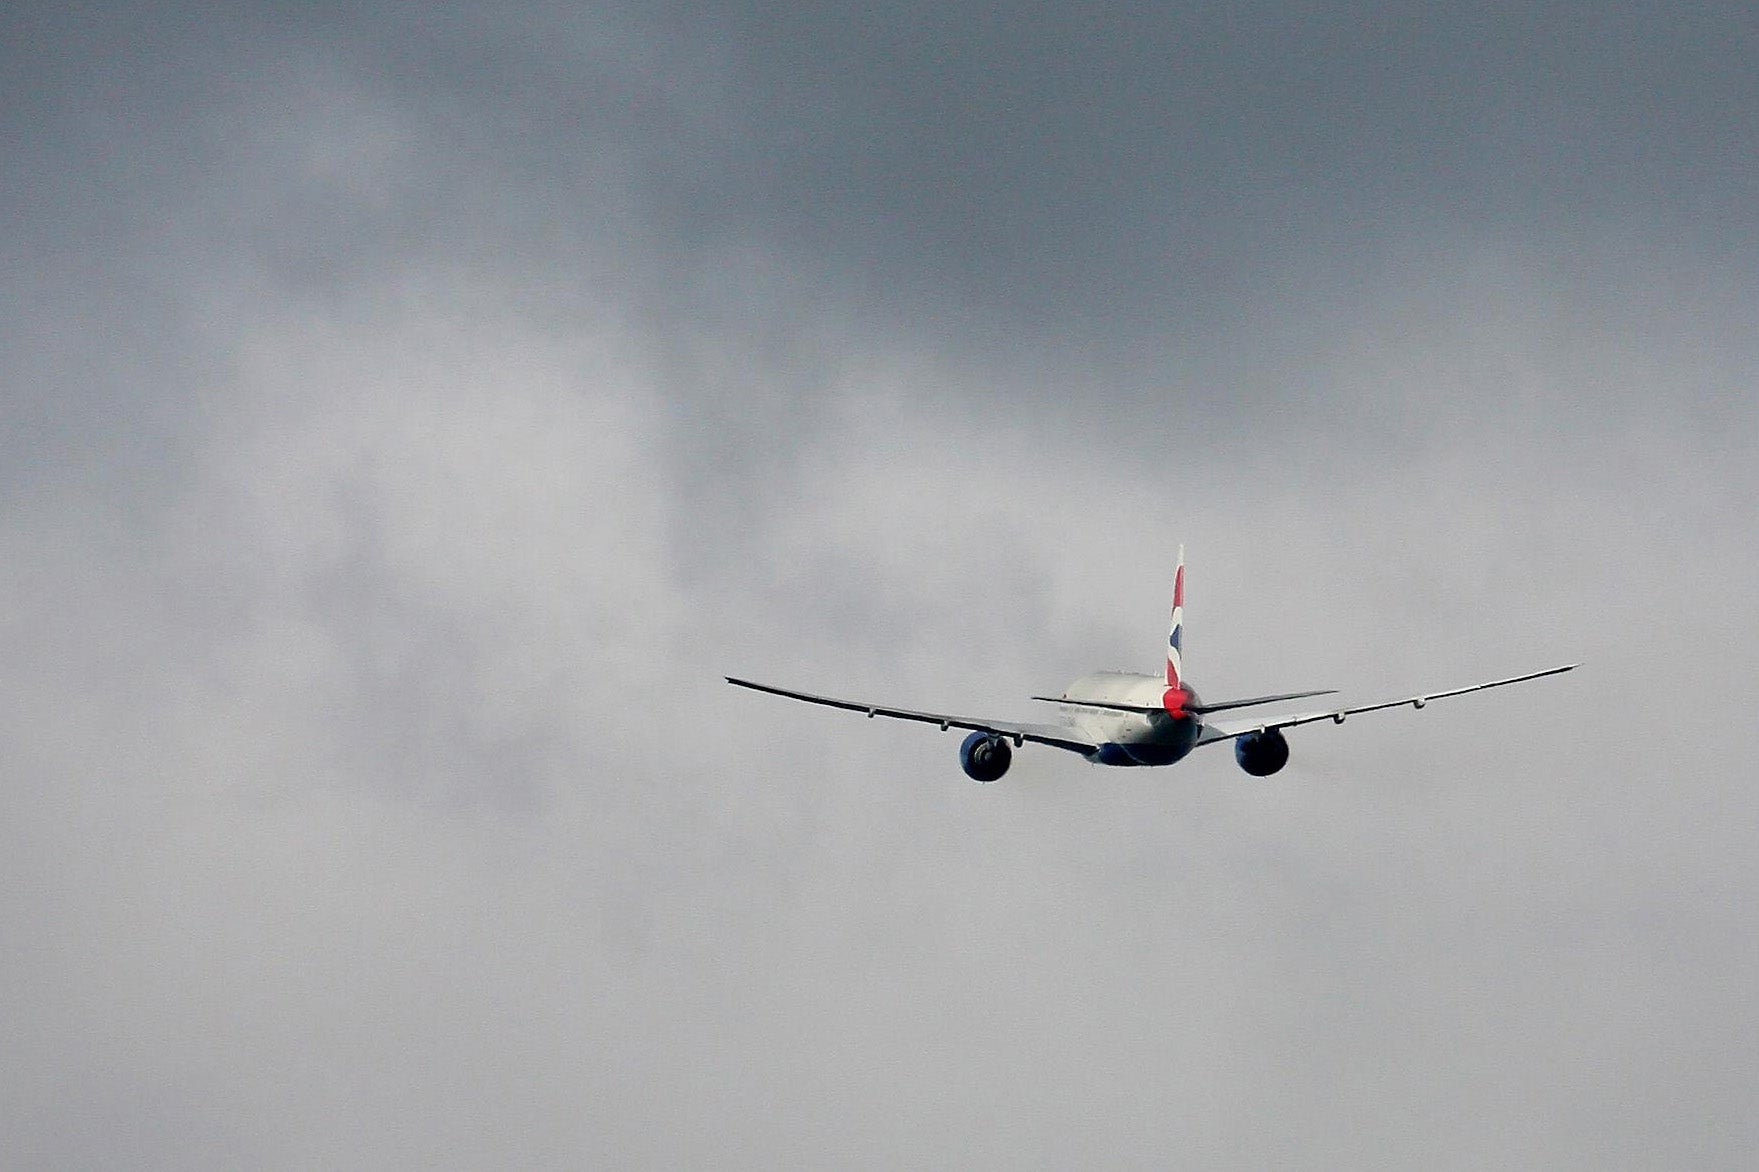 A British Airways Boeing 777 takes off from Gatwick Airport